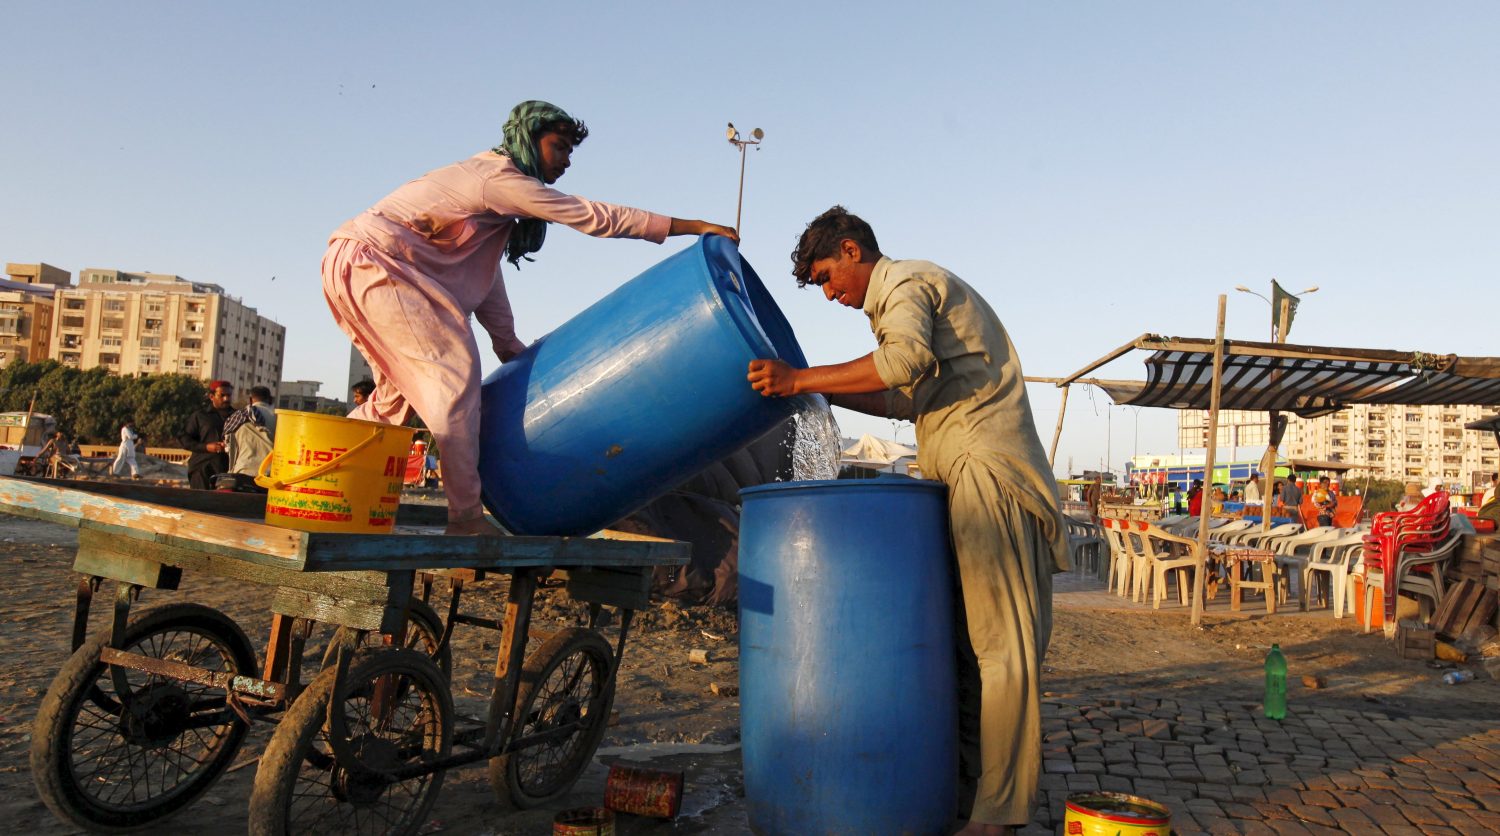 Men pour water brought by cart into a container at a stall on Clifton Beach in Karachi, Pakistan March 5, 2016. Some 650 million people, or one in 10 of the world's population, have no access to safe water, putting them at risk of infectious diseases and premature death. Dirty water and poor sanitation can cause severe diarrhoeal diseases in children, killing 900 under-five a day across the world, according to United Nations estimates. World Water Day, marked this year on March 22, highlights various concerns about the world's water resources, and in 2016 is focusing on how good access to safe water can create paid work and contribute to a greener economy. REUTERS/Akhtar Soomro SEARCH "SAFE WATER" FOR THIS STORY. SEARCH "THE WIDER IMAGE" FOR ALL STORIES - RTSANXL